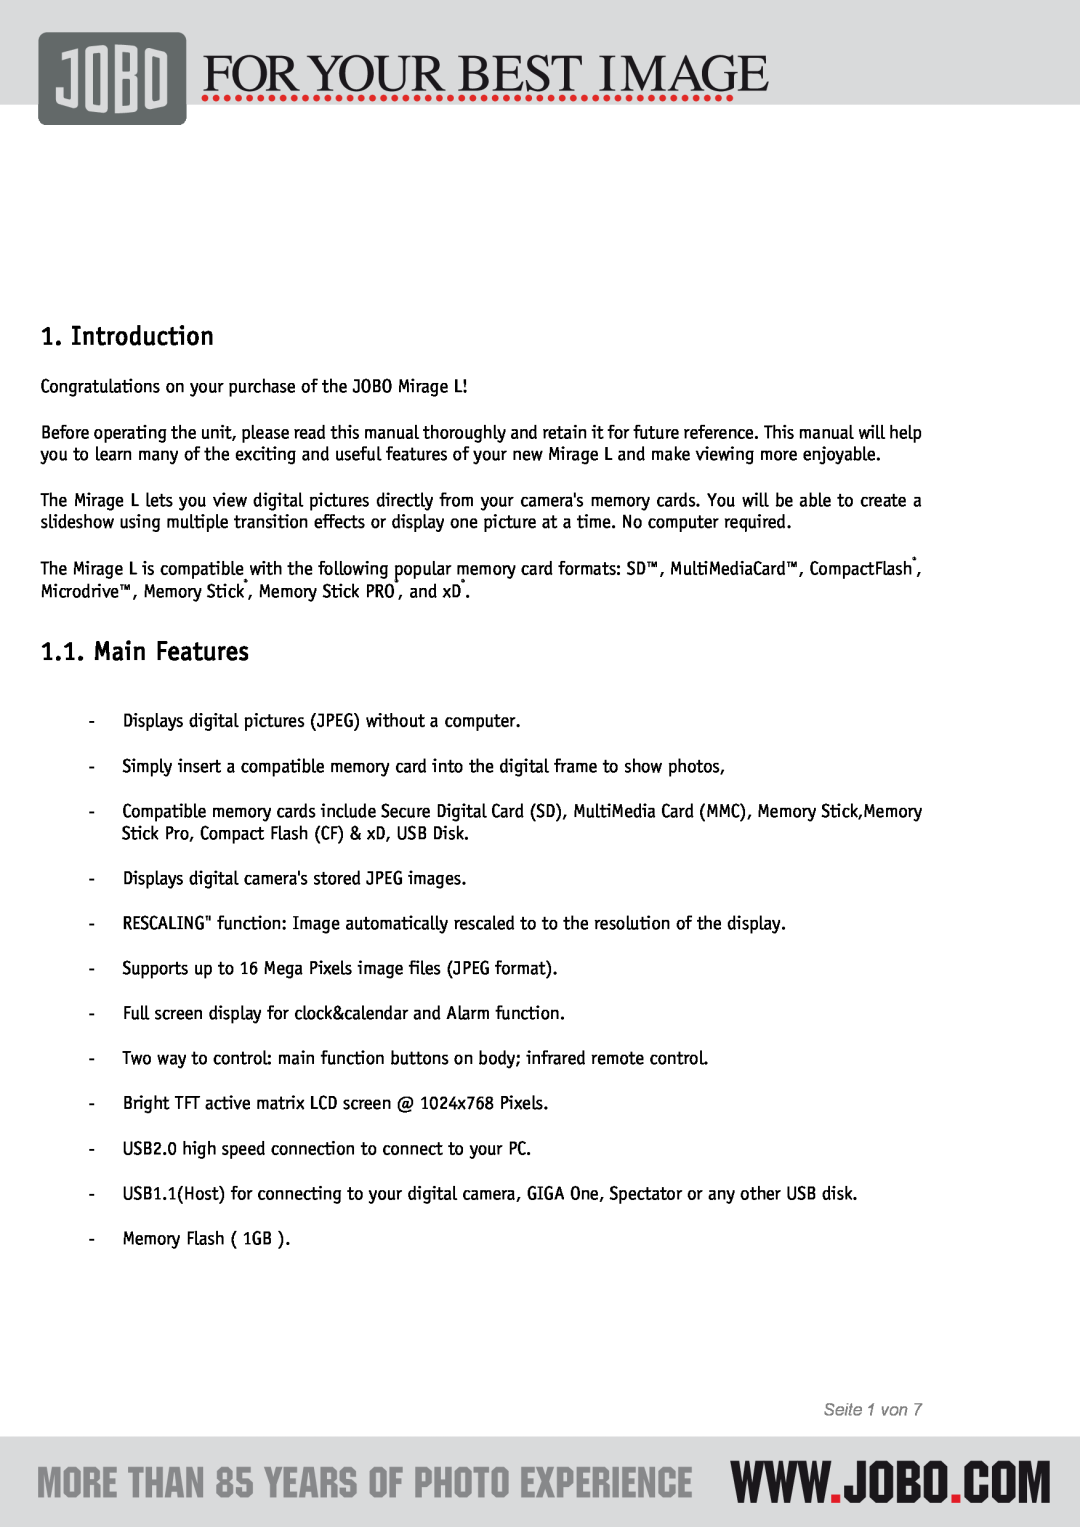 JOBO Mirage L instruction manual Introduction, Main Features 